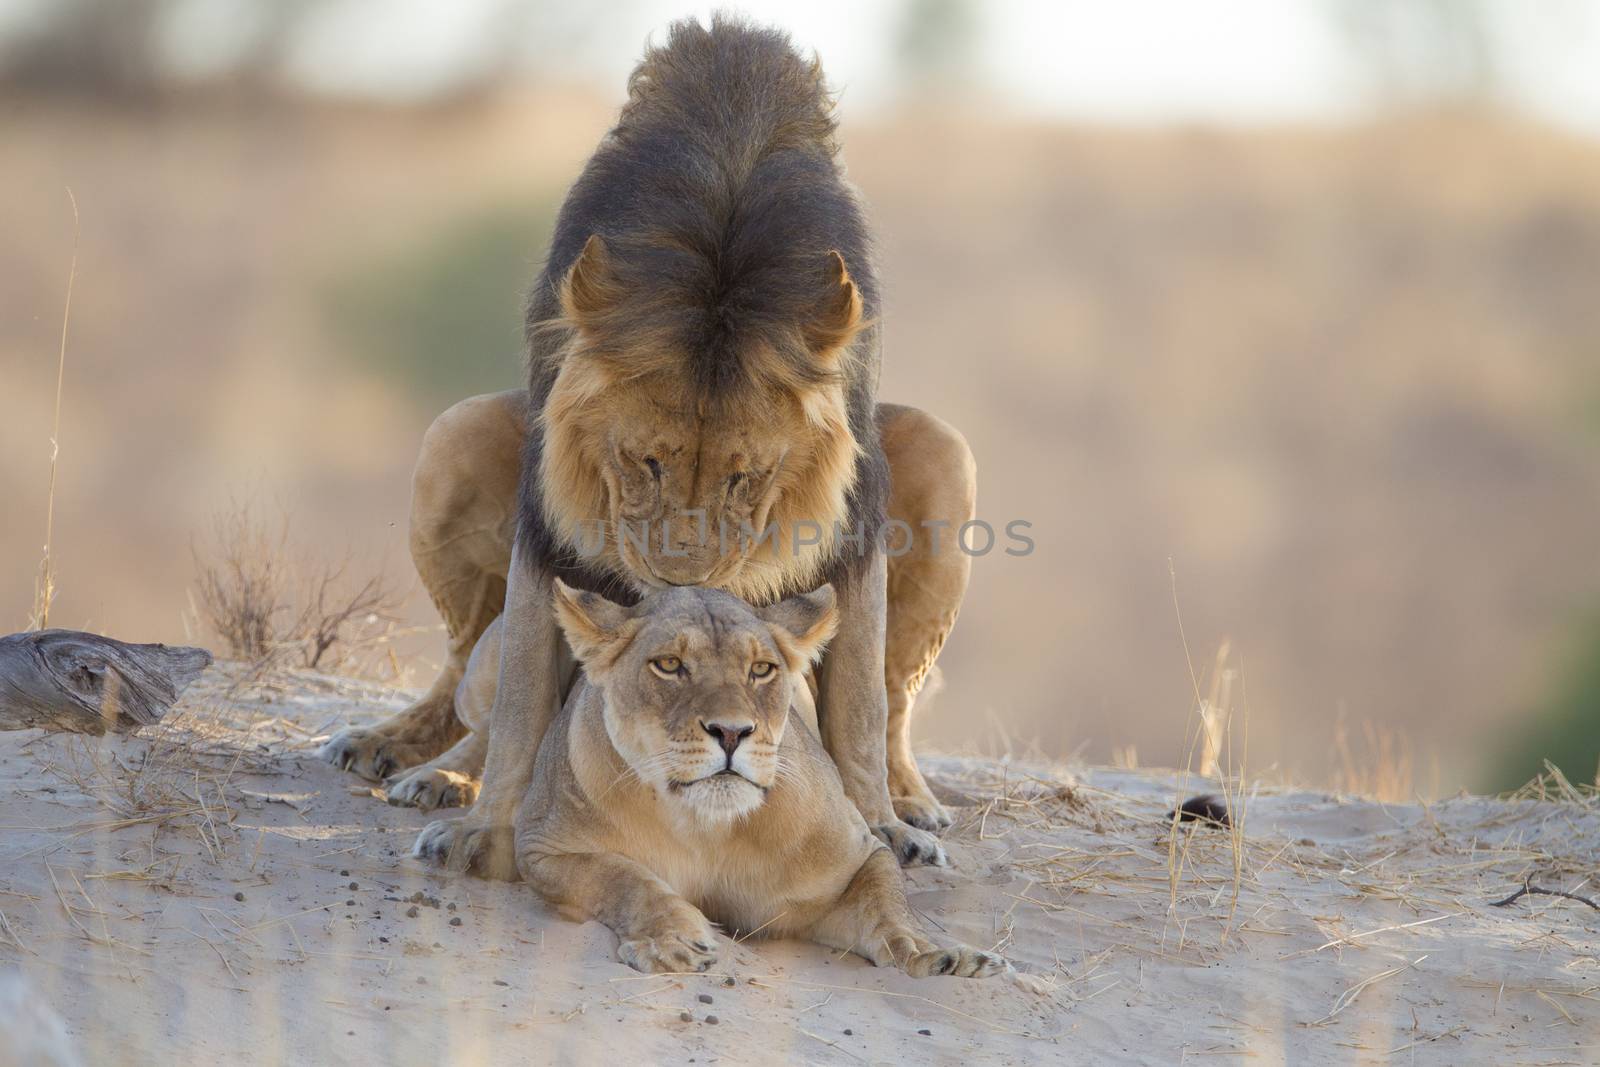 Lions mating in the wilderness of Africa